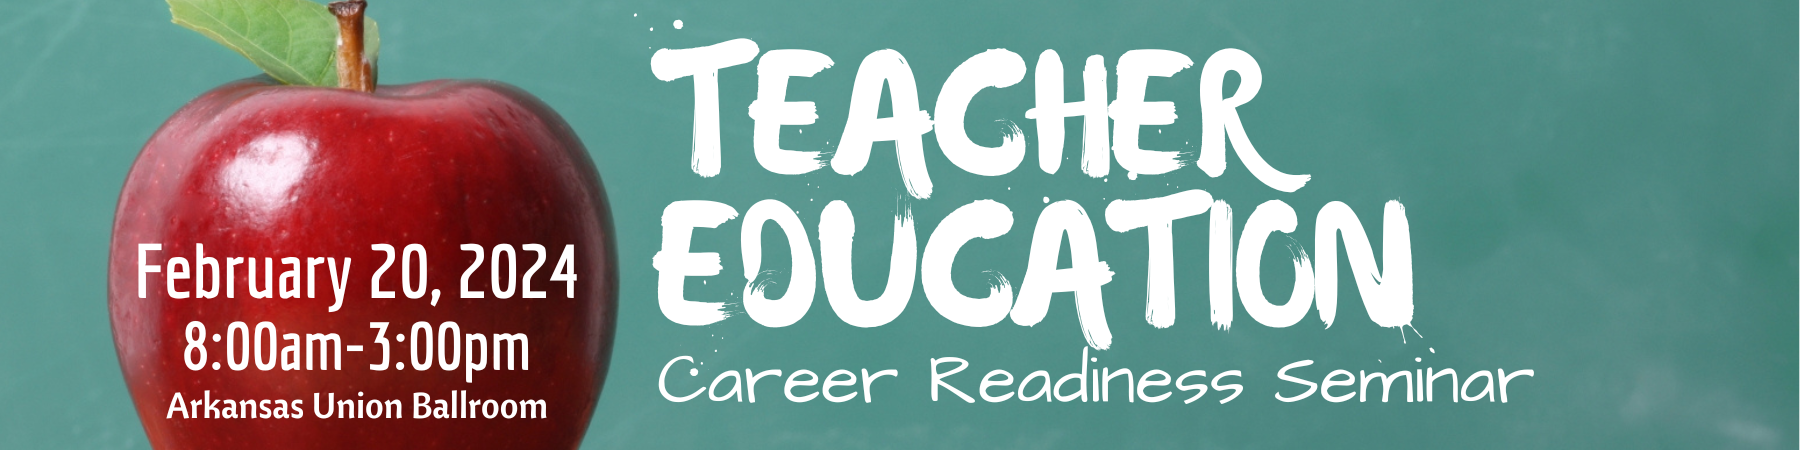 Teacher Education Career Readiness Seminar, Tuesday, February 20th 2024 from 8:00am-3:00pm.